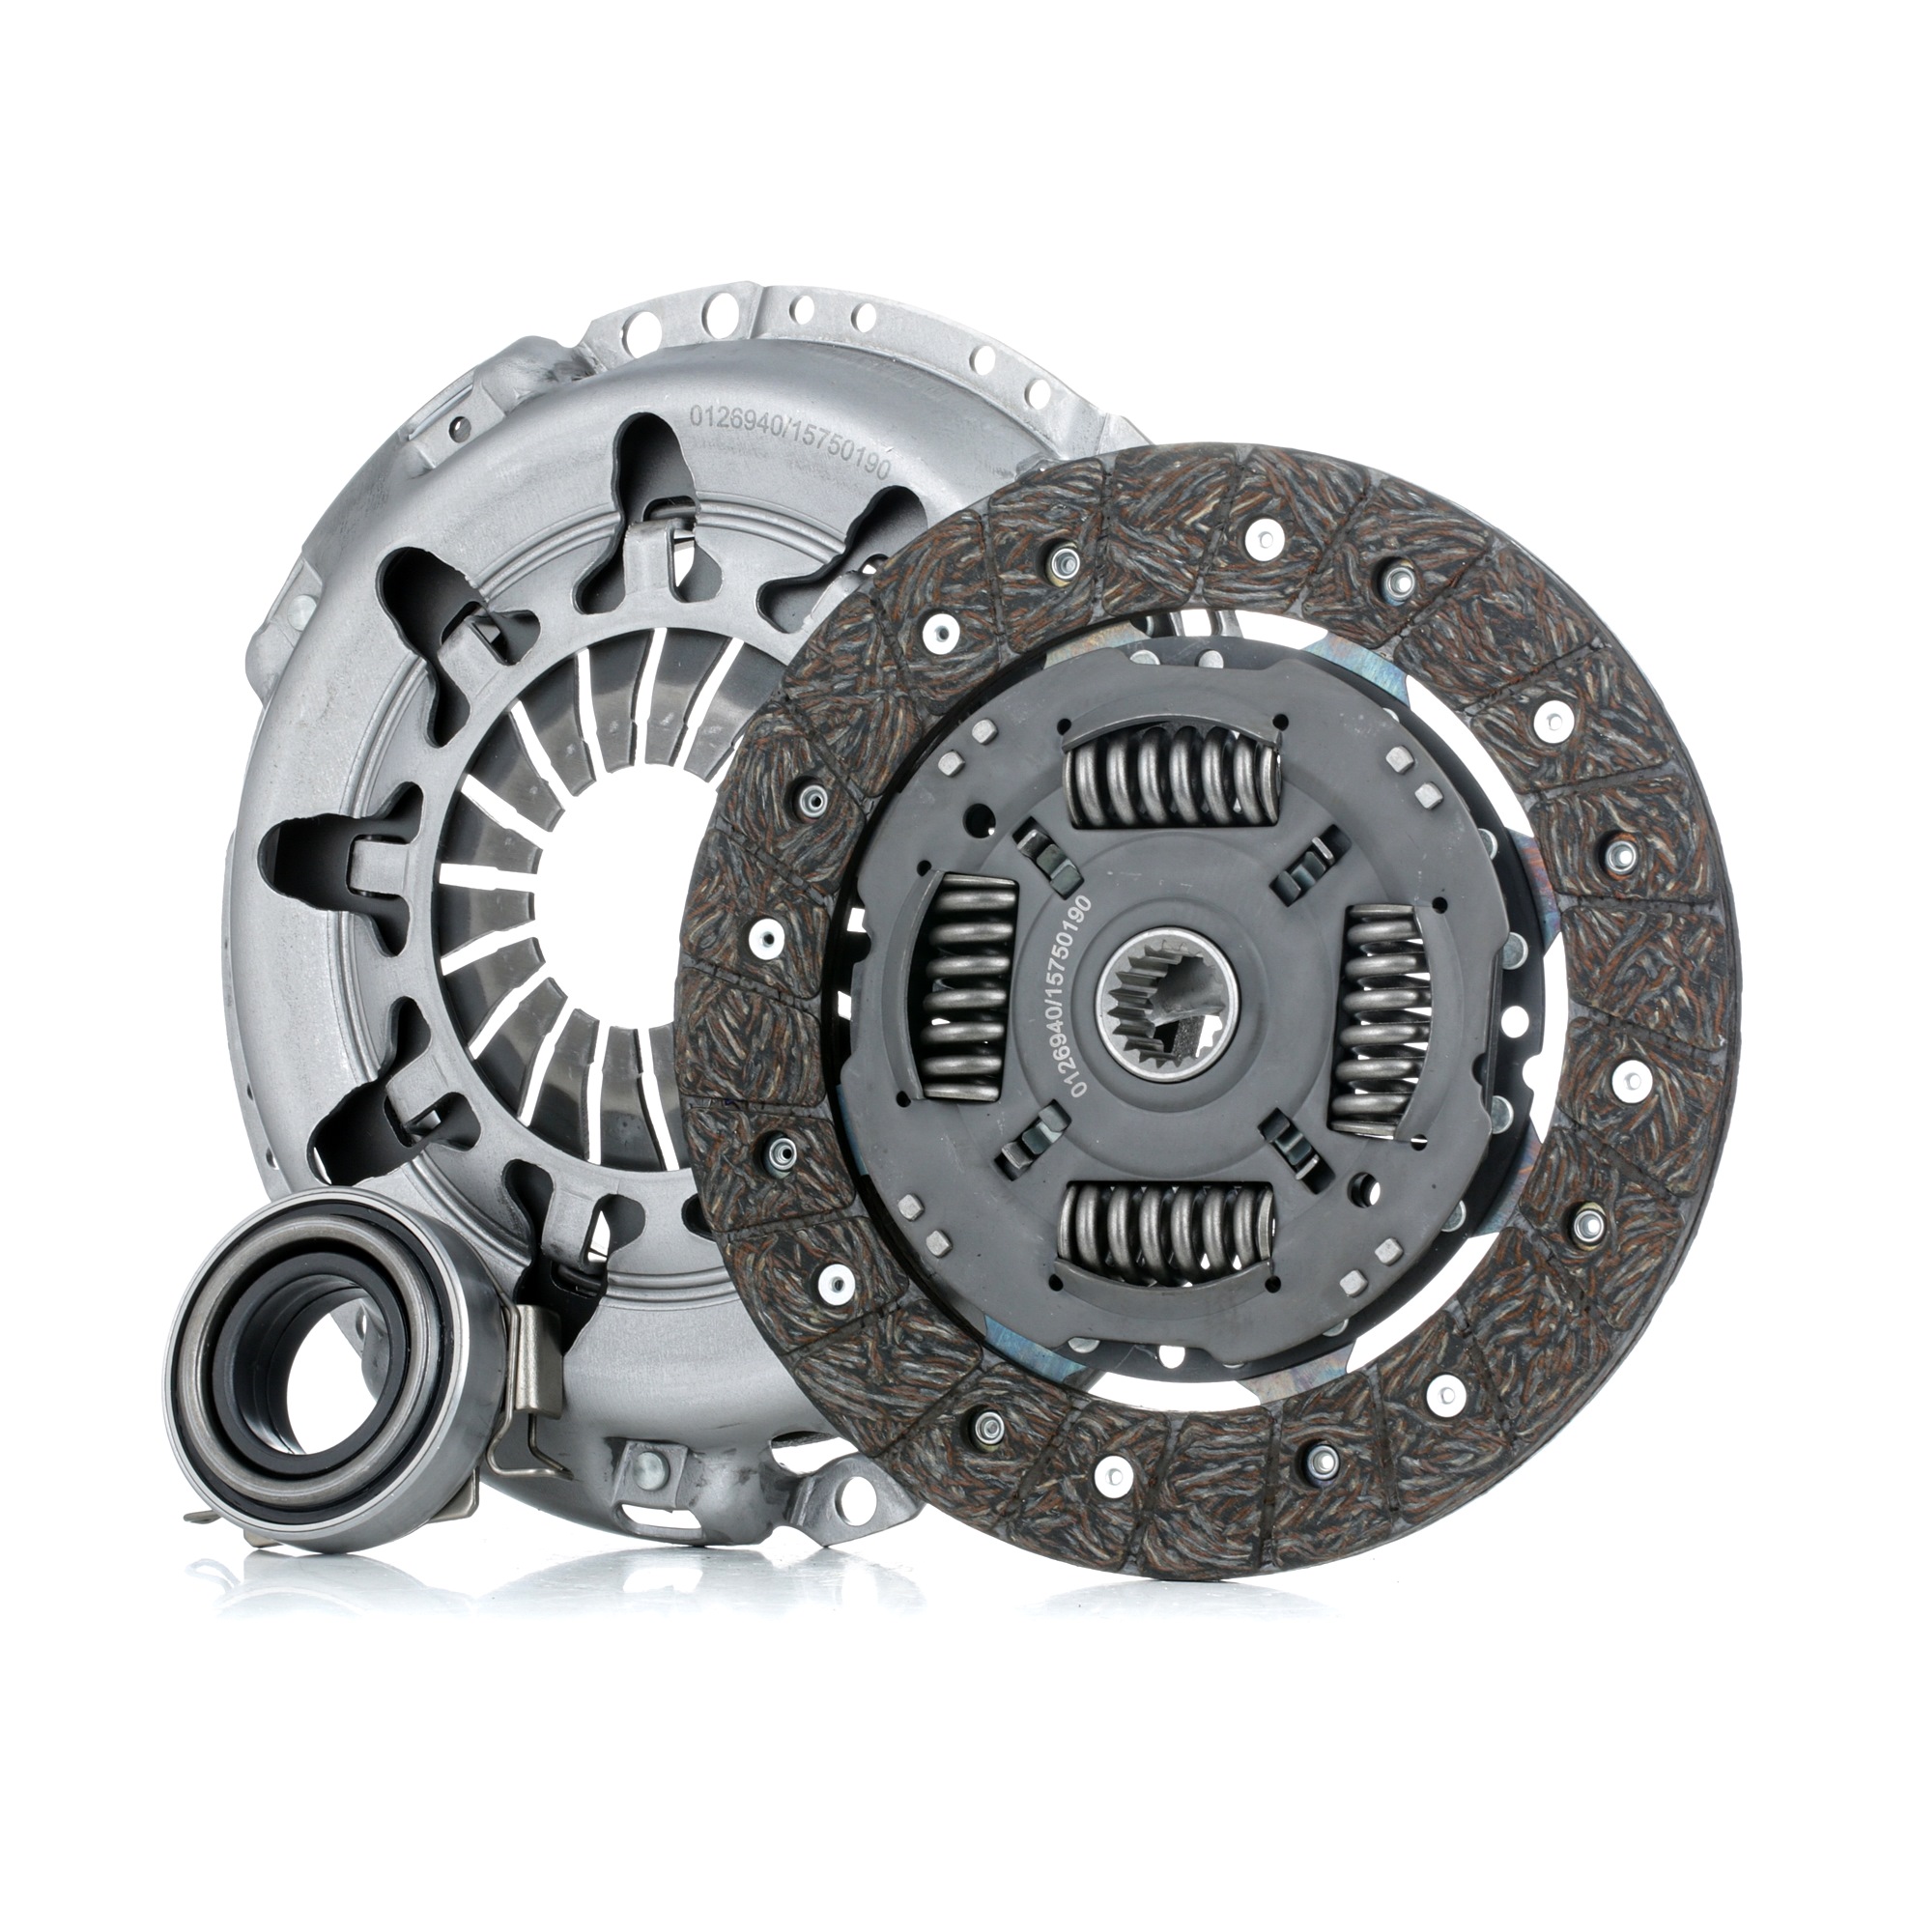 SKCK-0100914 STARK Clutch set TOYOTA three-piece, with clutch release bearing, with clutch disc, 200mm